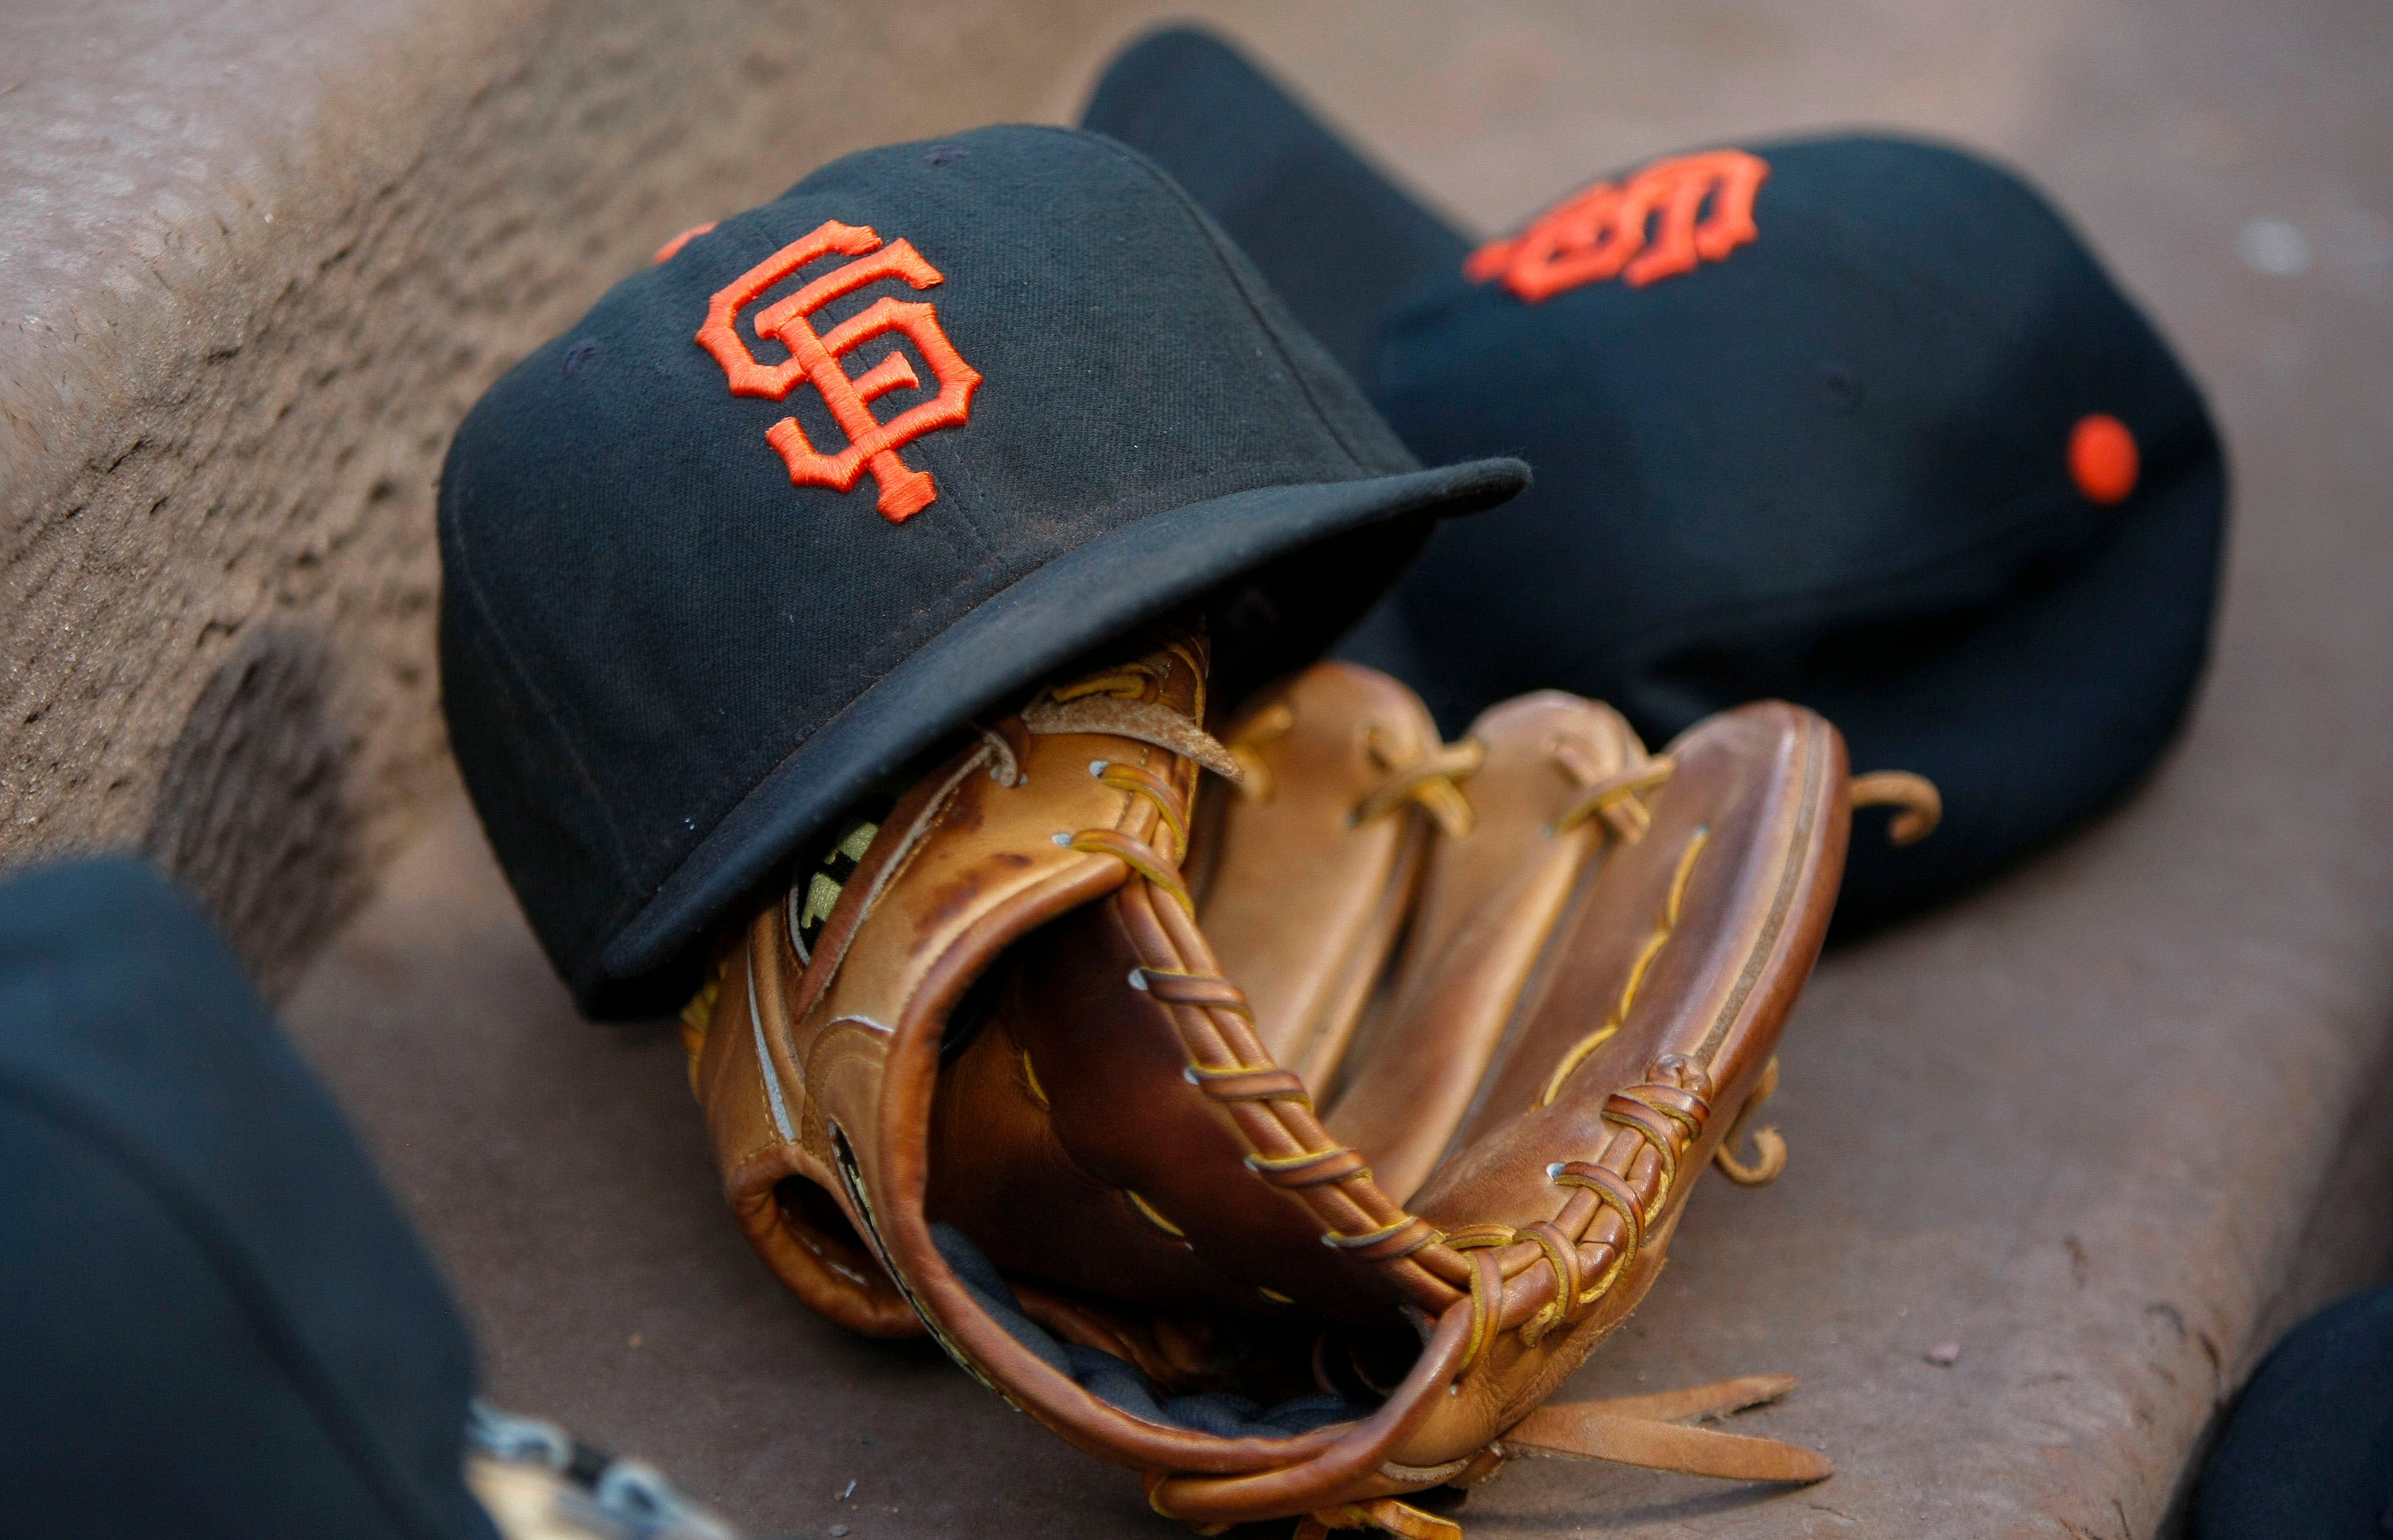 SF Giants shake up team with six roster moves before final series - Sports  Illustrated San Francisco Giants News, Analysis and More